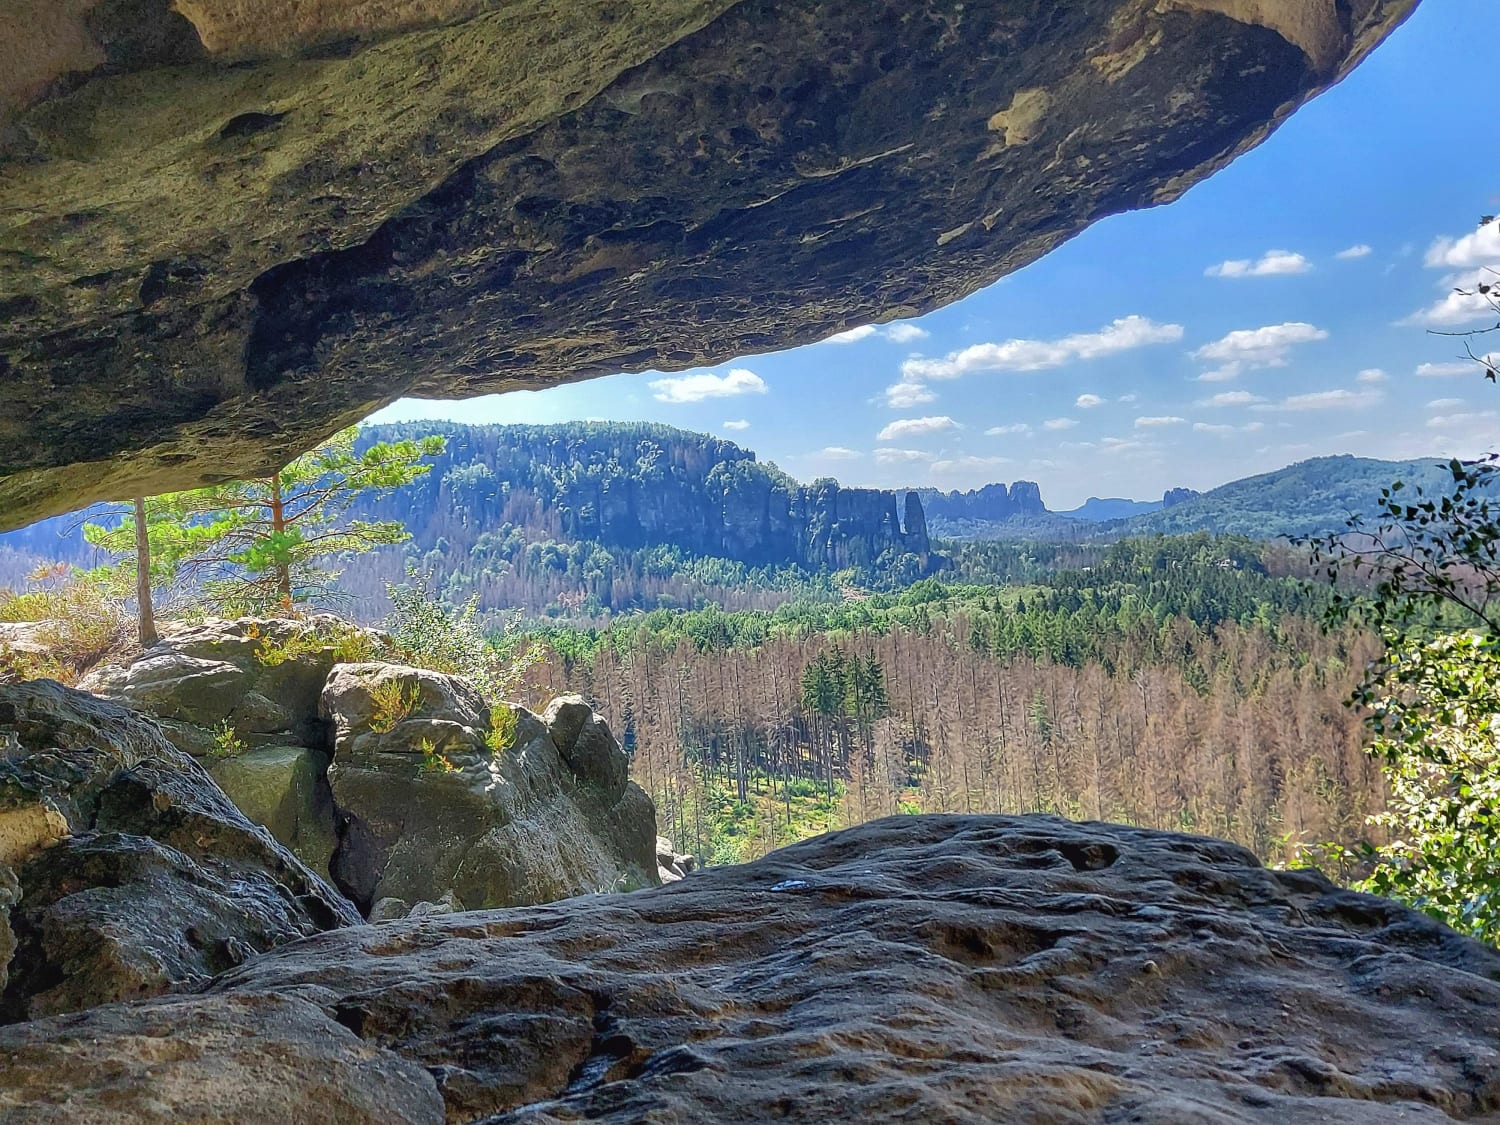 Saxony, Germany from a small cave in the mountains